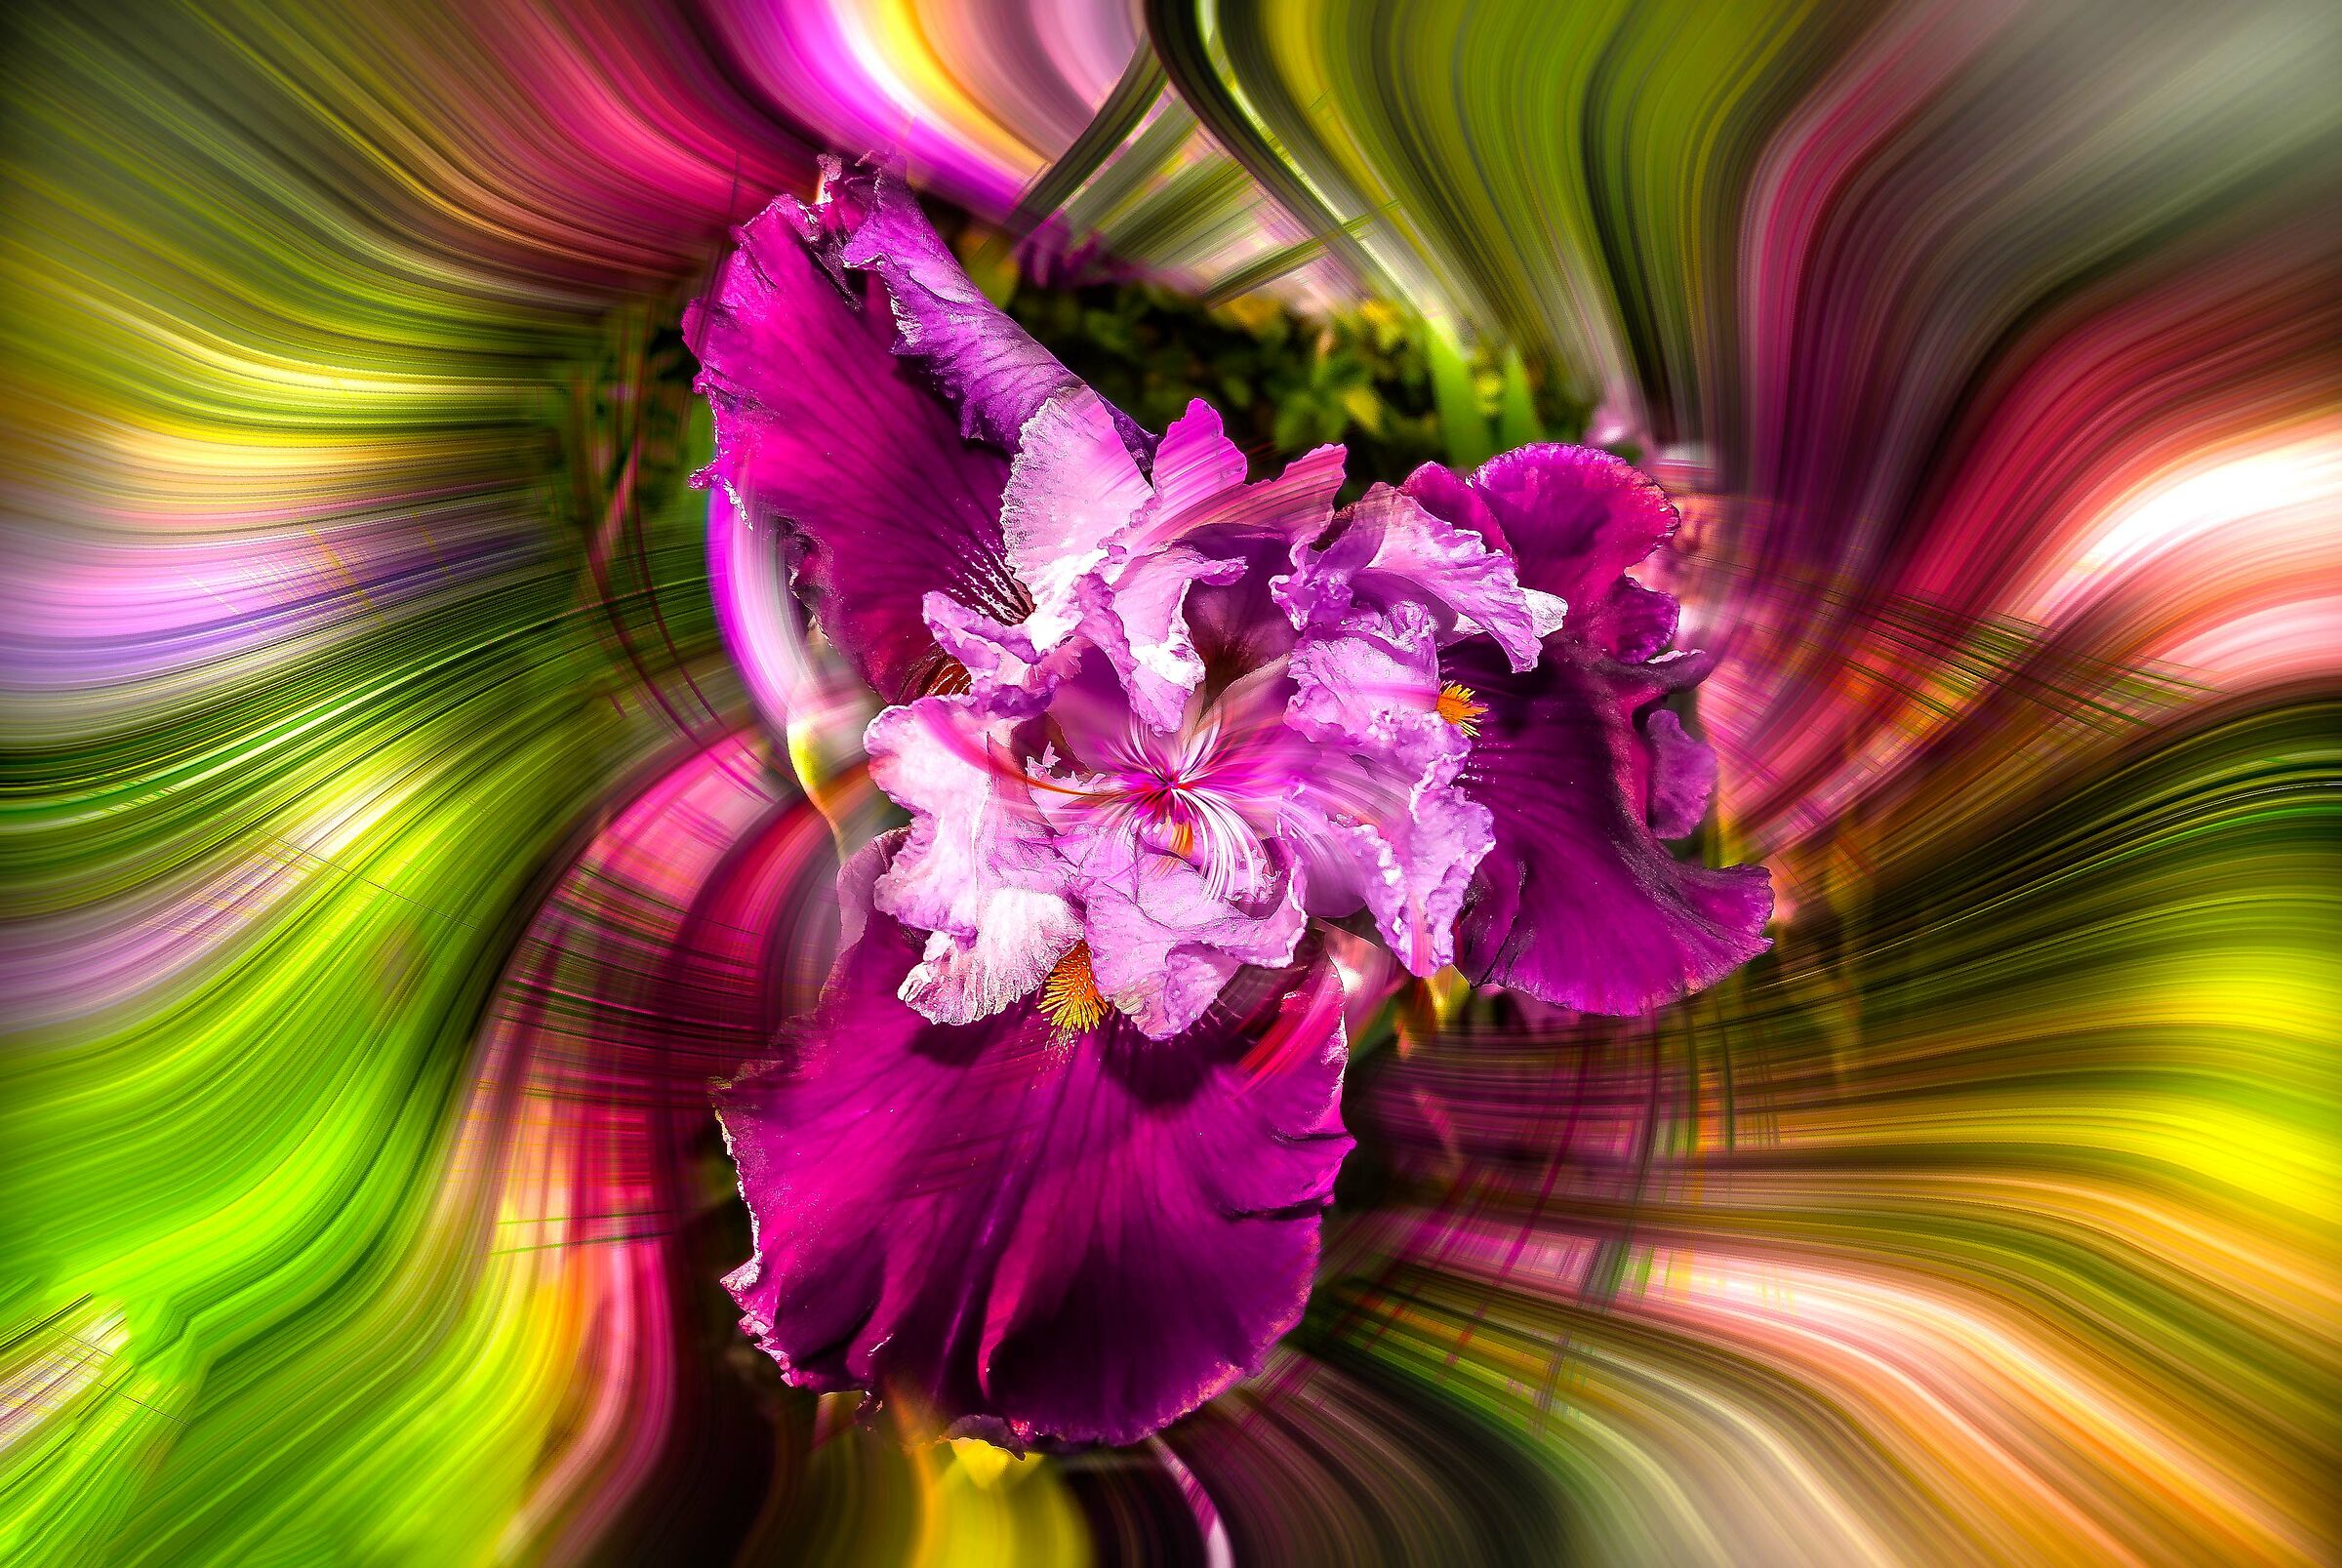 twirl effect with flower...